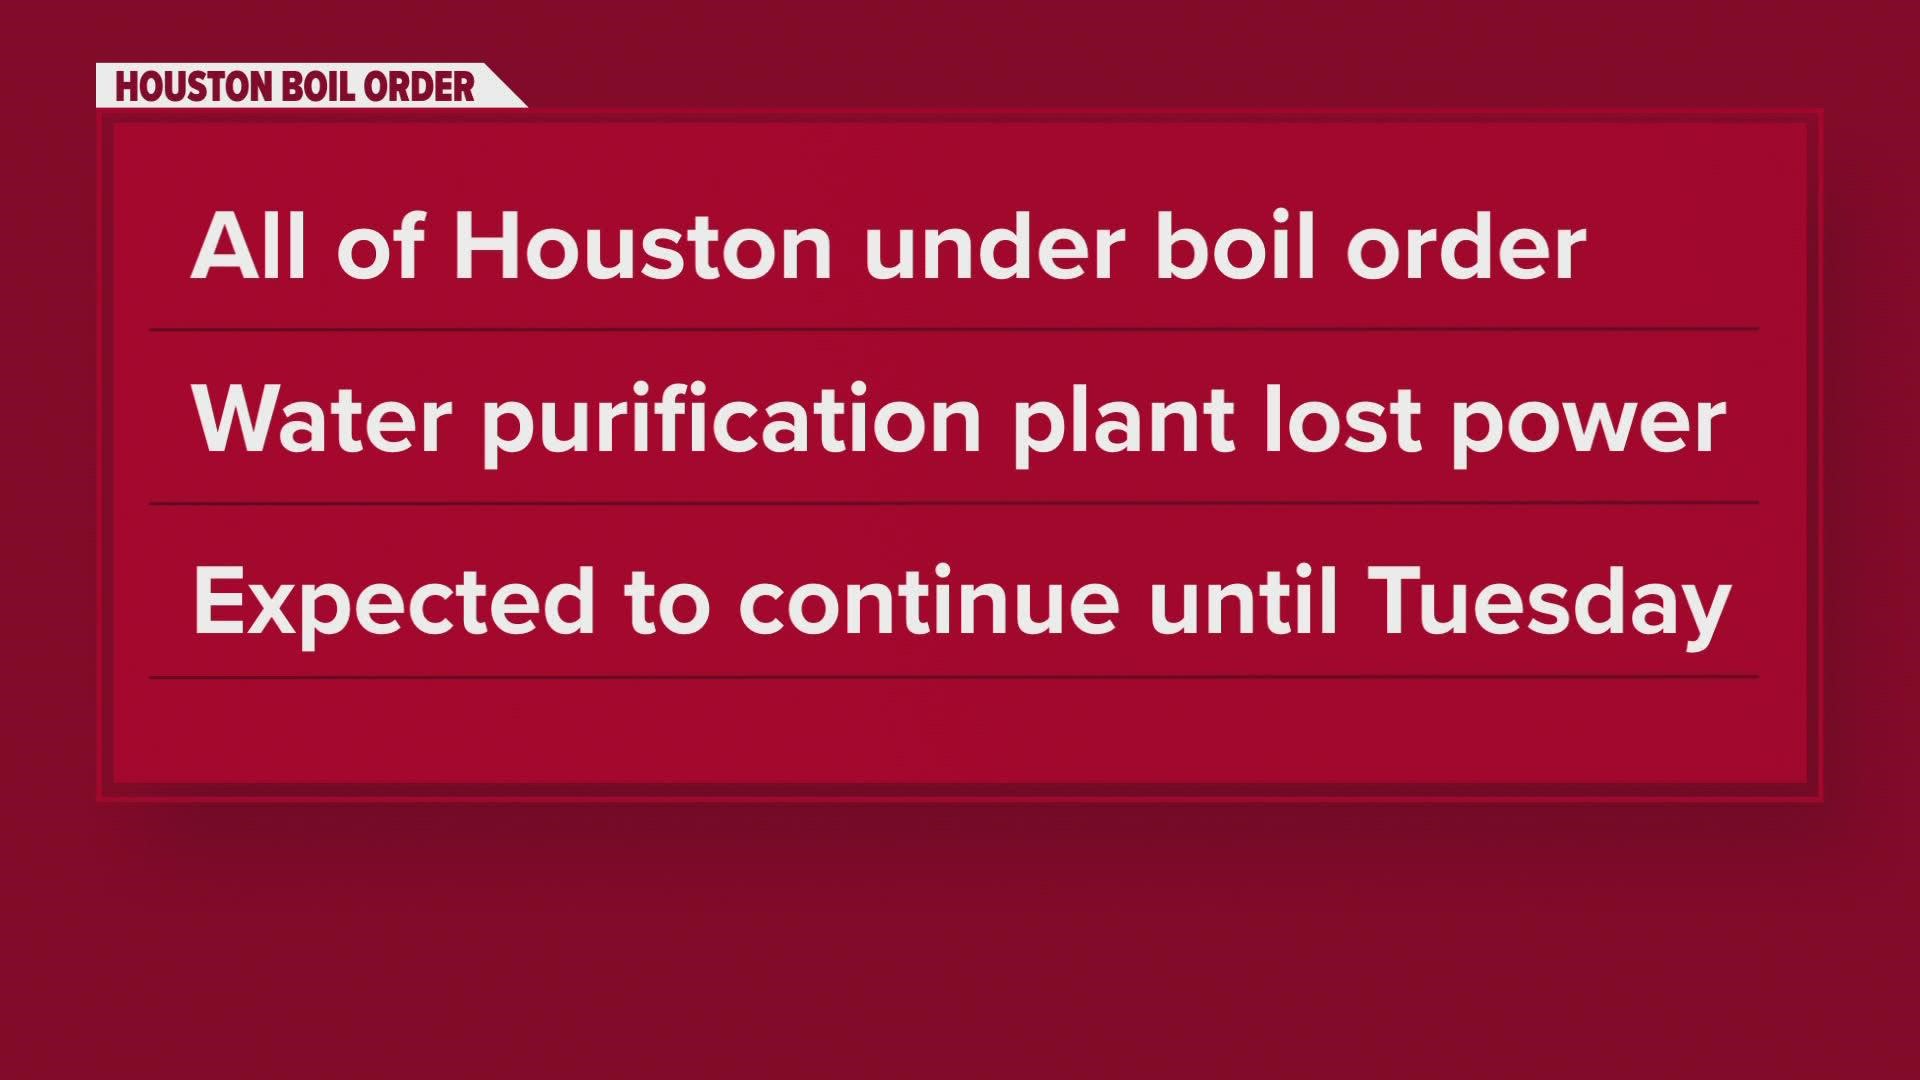 The entire city of Houston is currently under a notice to boil water before use.